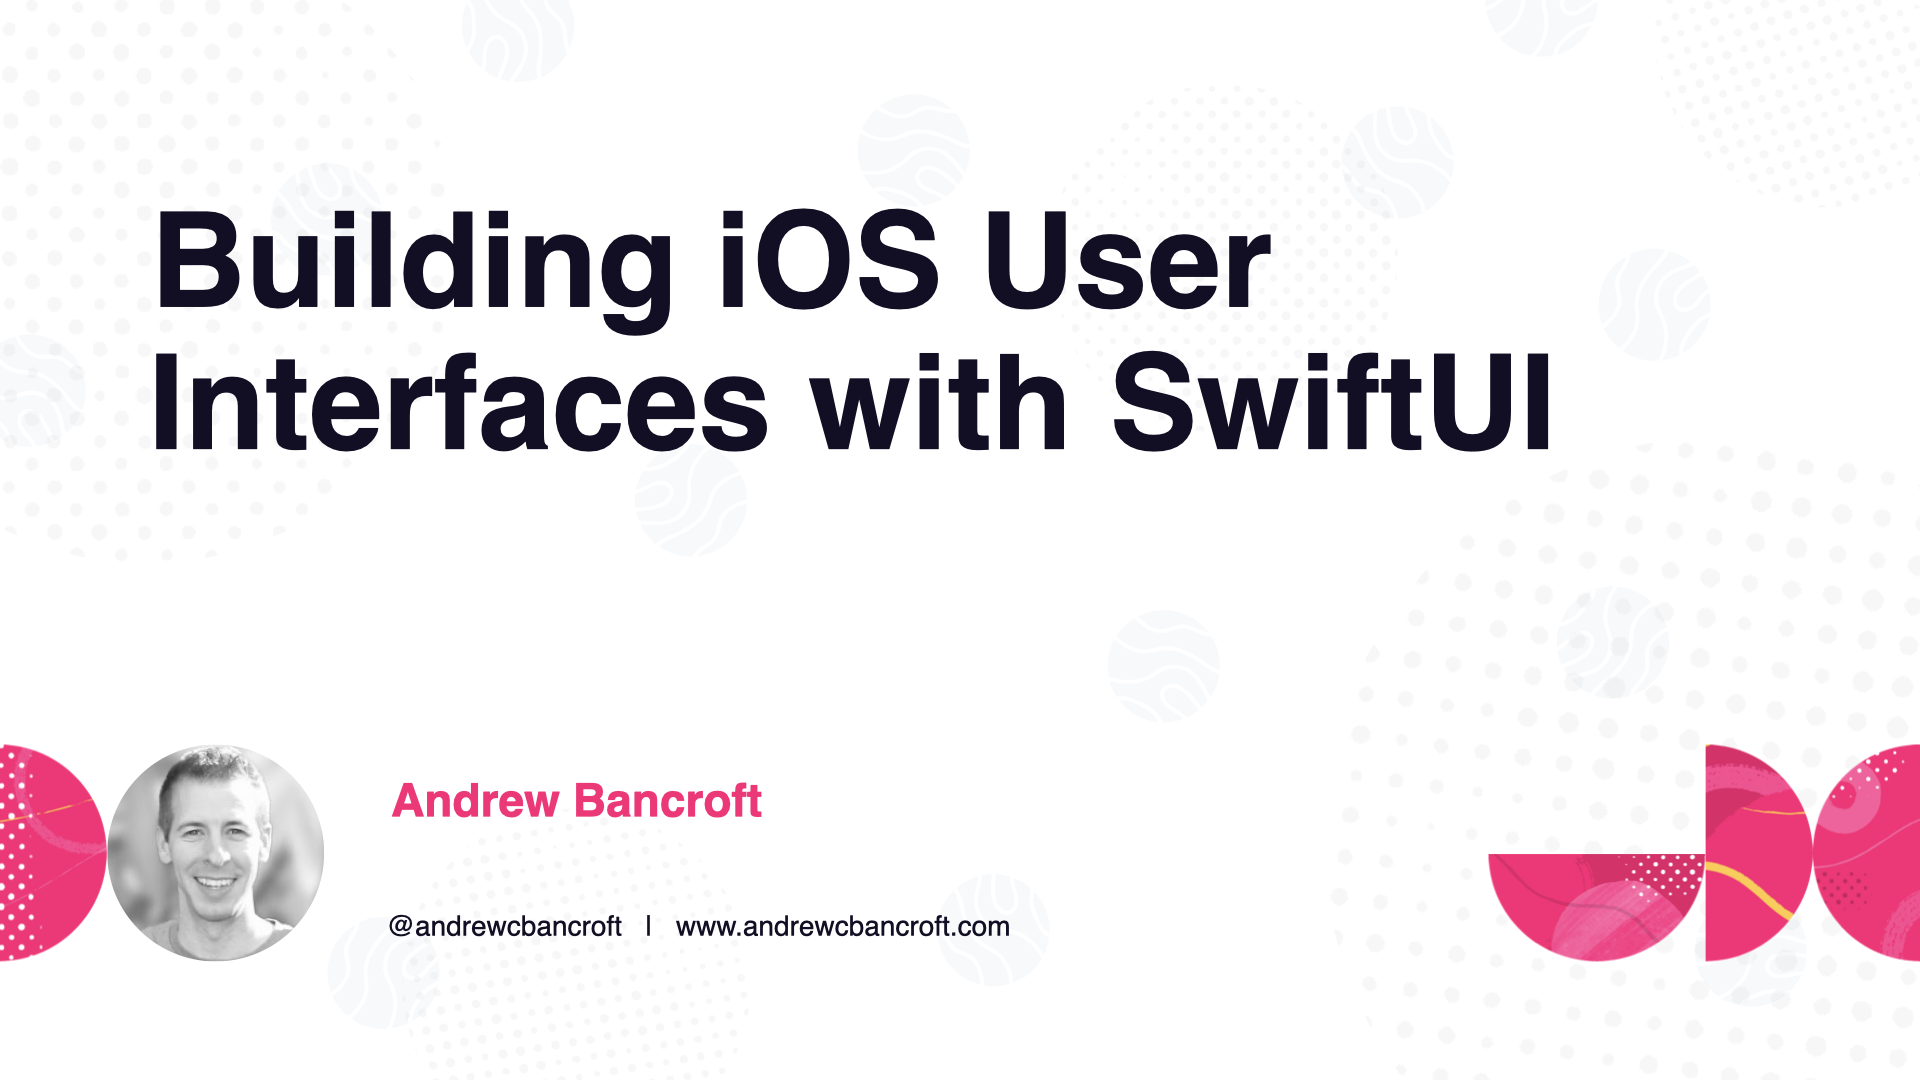 Building iOS User Interfaces with SwiftUI